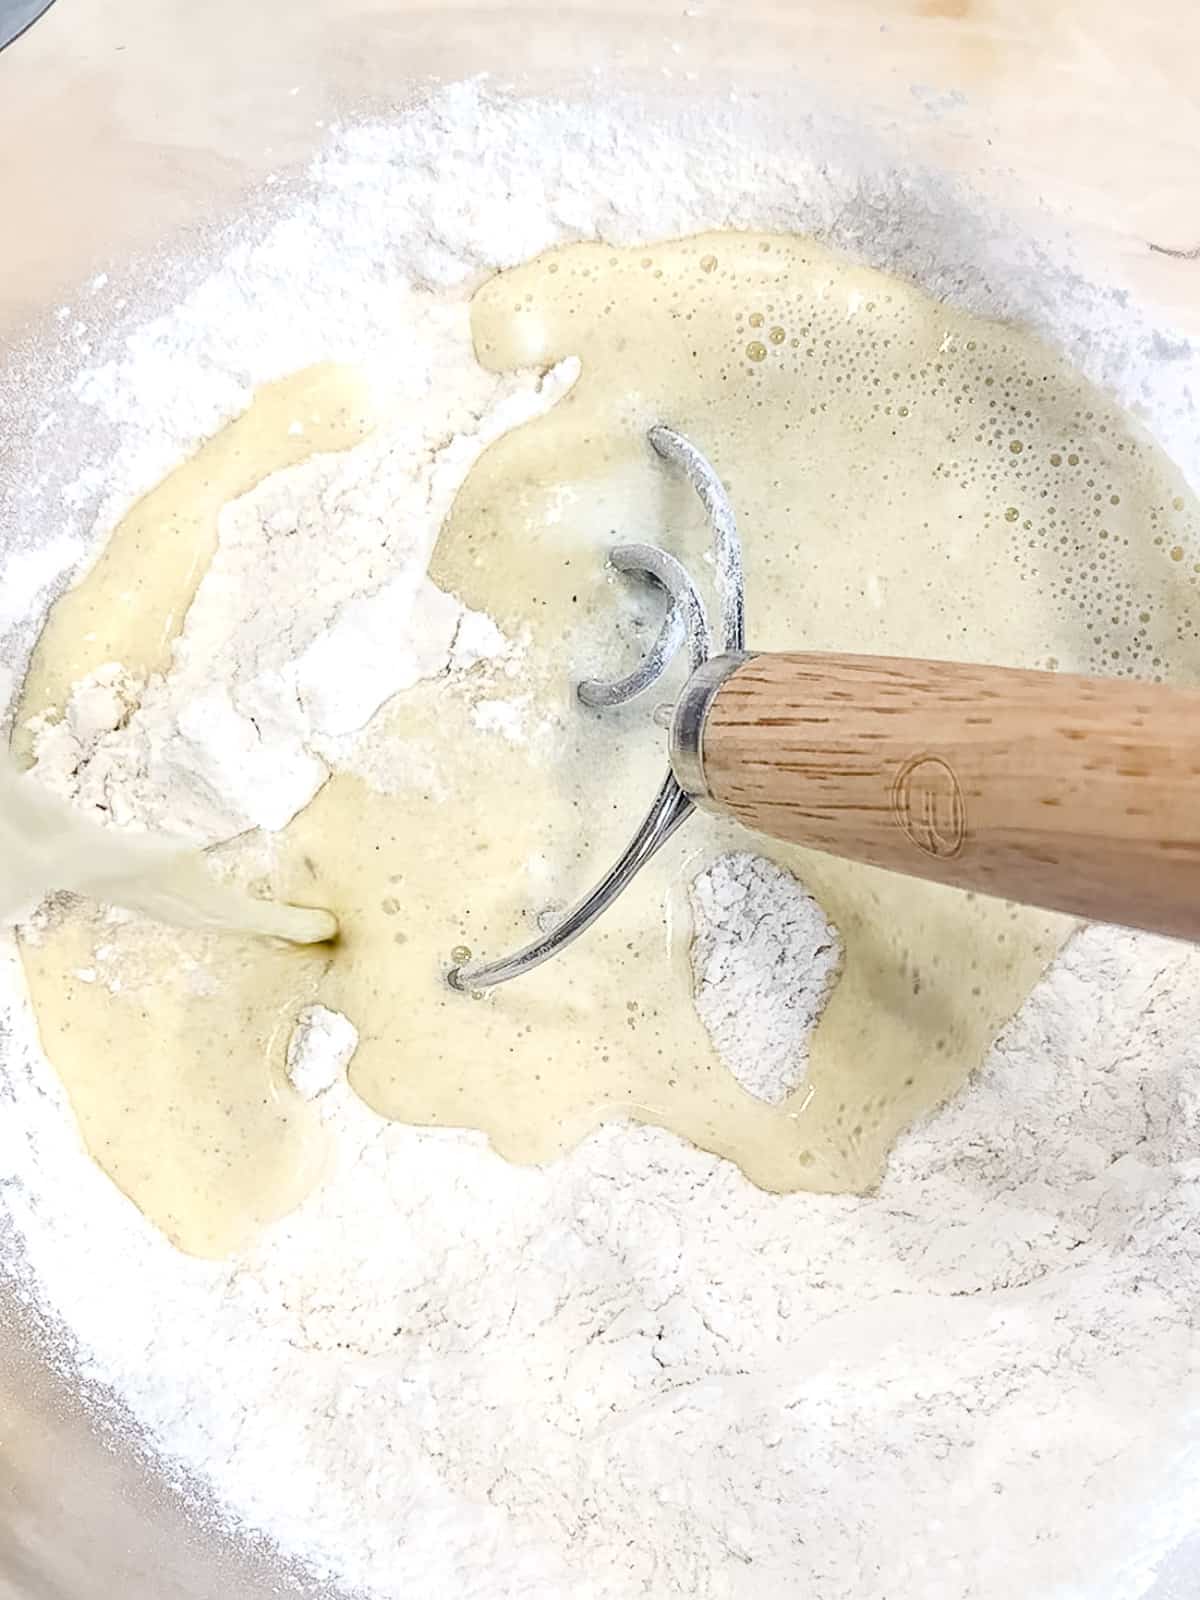 Mixing wet and dry ingredients to make cinnamon roll dough.